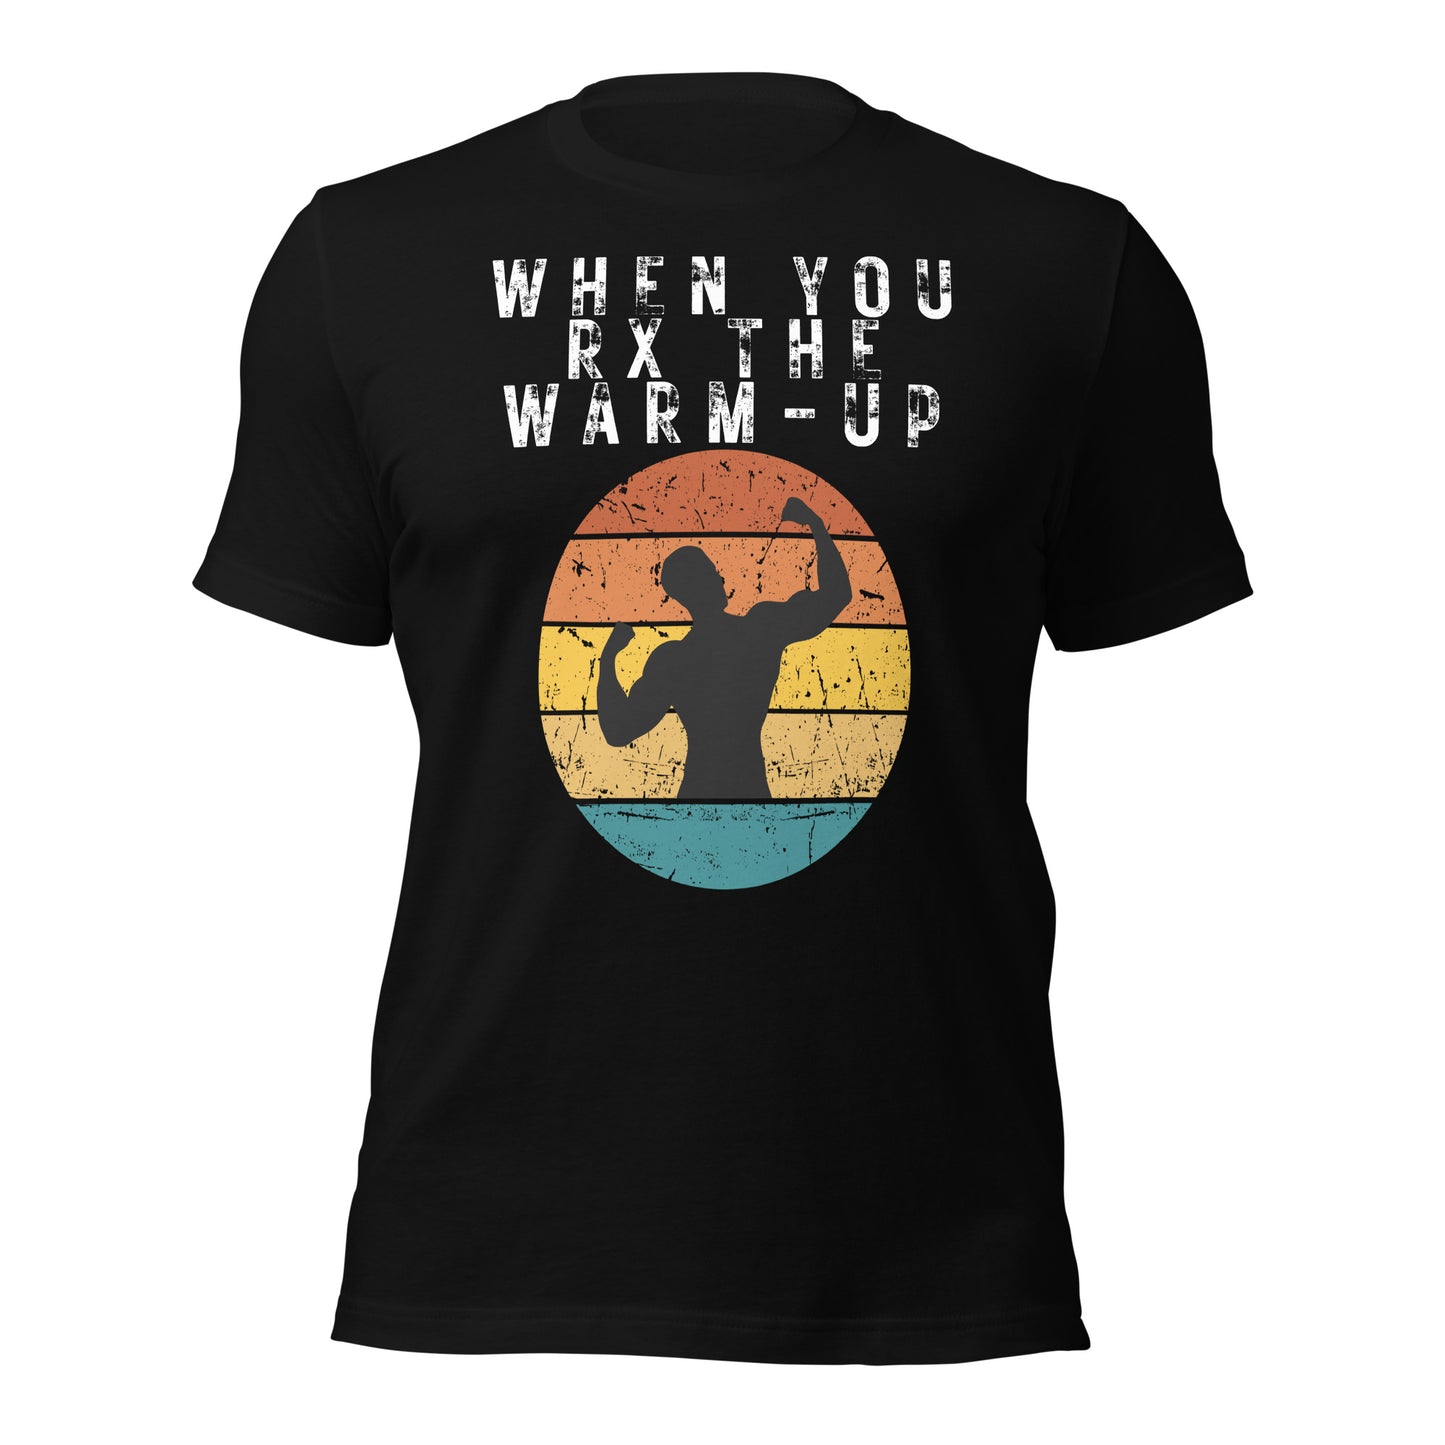 Warm Up Funny Crossfit Shirt, Crossfit Workout Shirt, Crossfit Gifts, Crossfit Coach Gift, Unisex